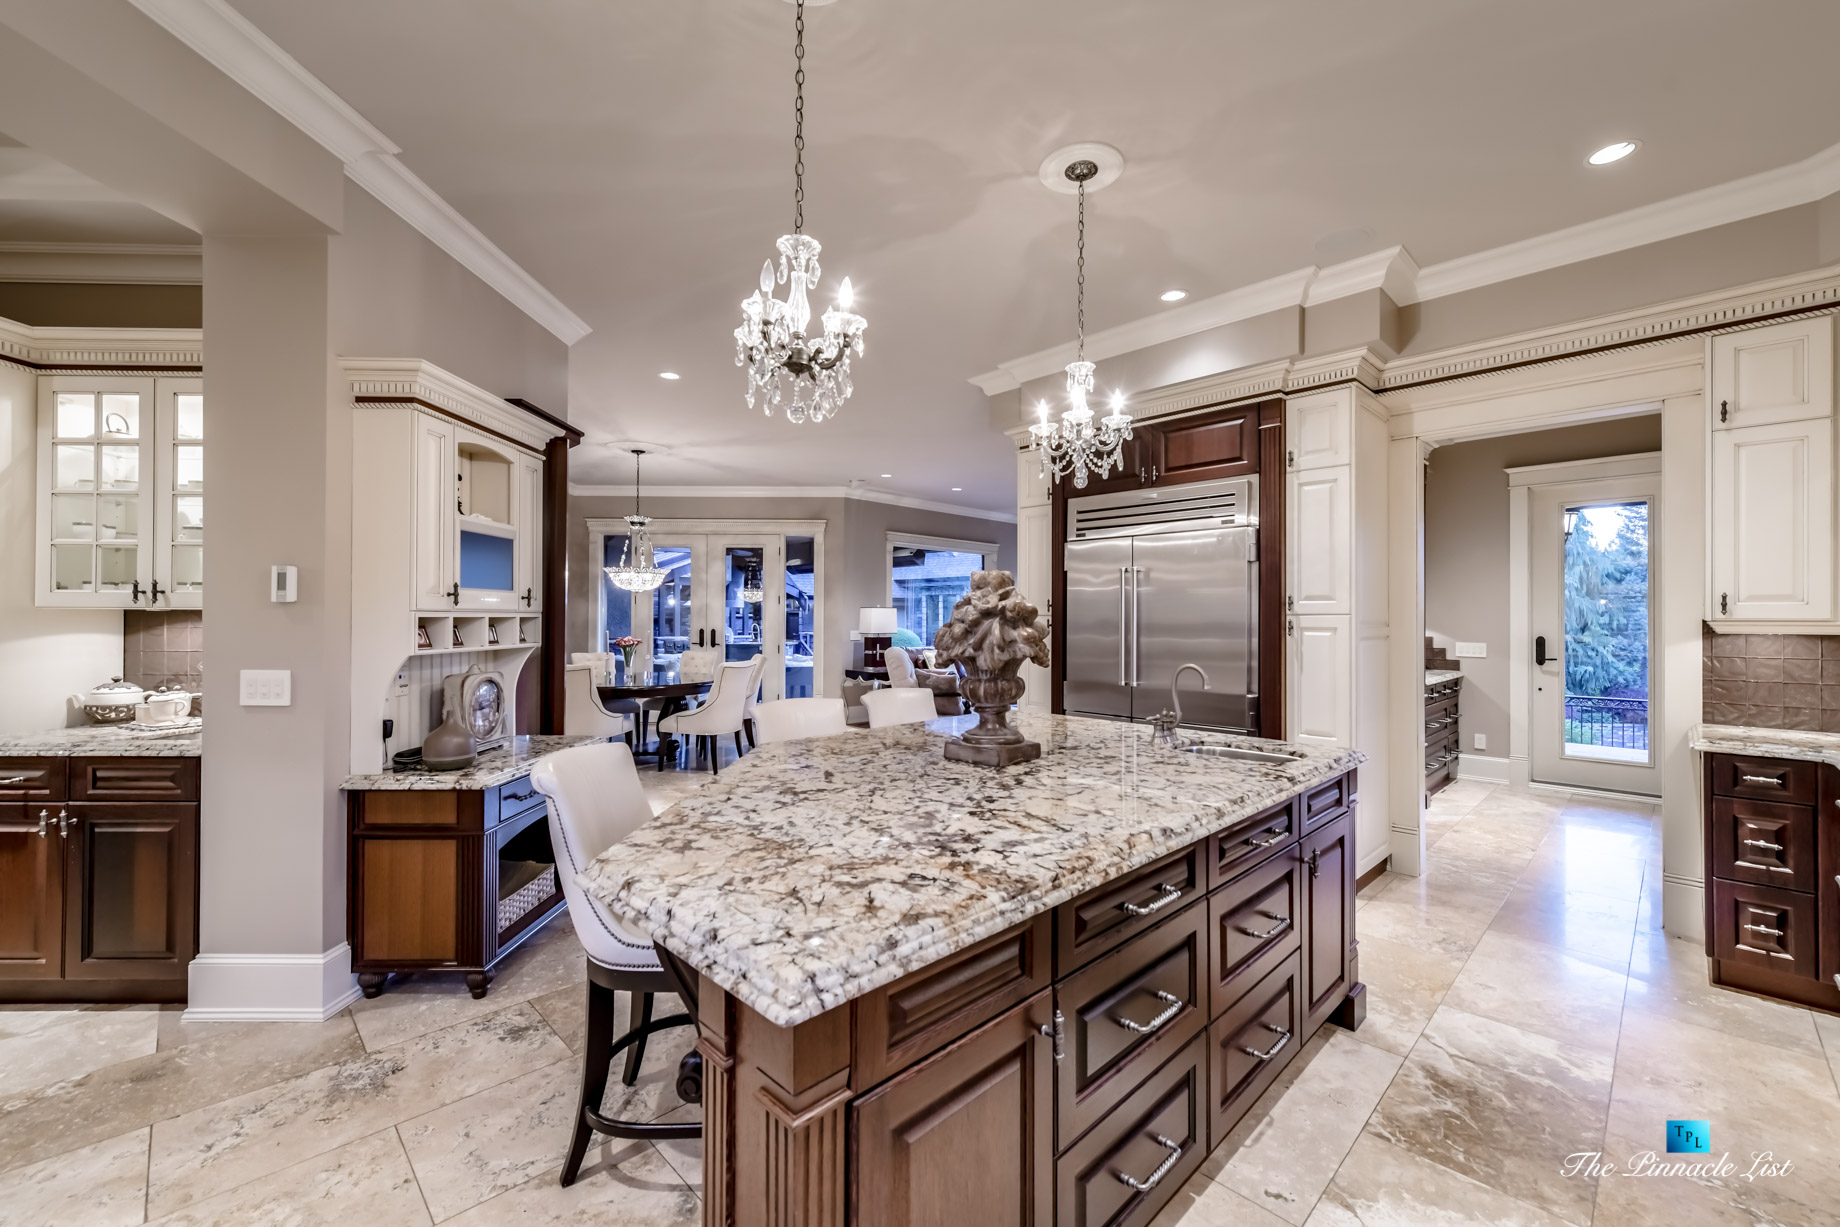 3053 Anmore Creek Way, Anmore, BC, Canada - Majestic Kitchen Island - Luxury Real Estate - Greater Vancouver Home